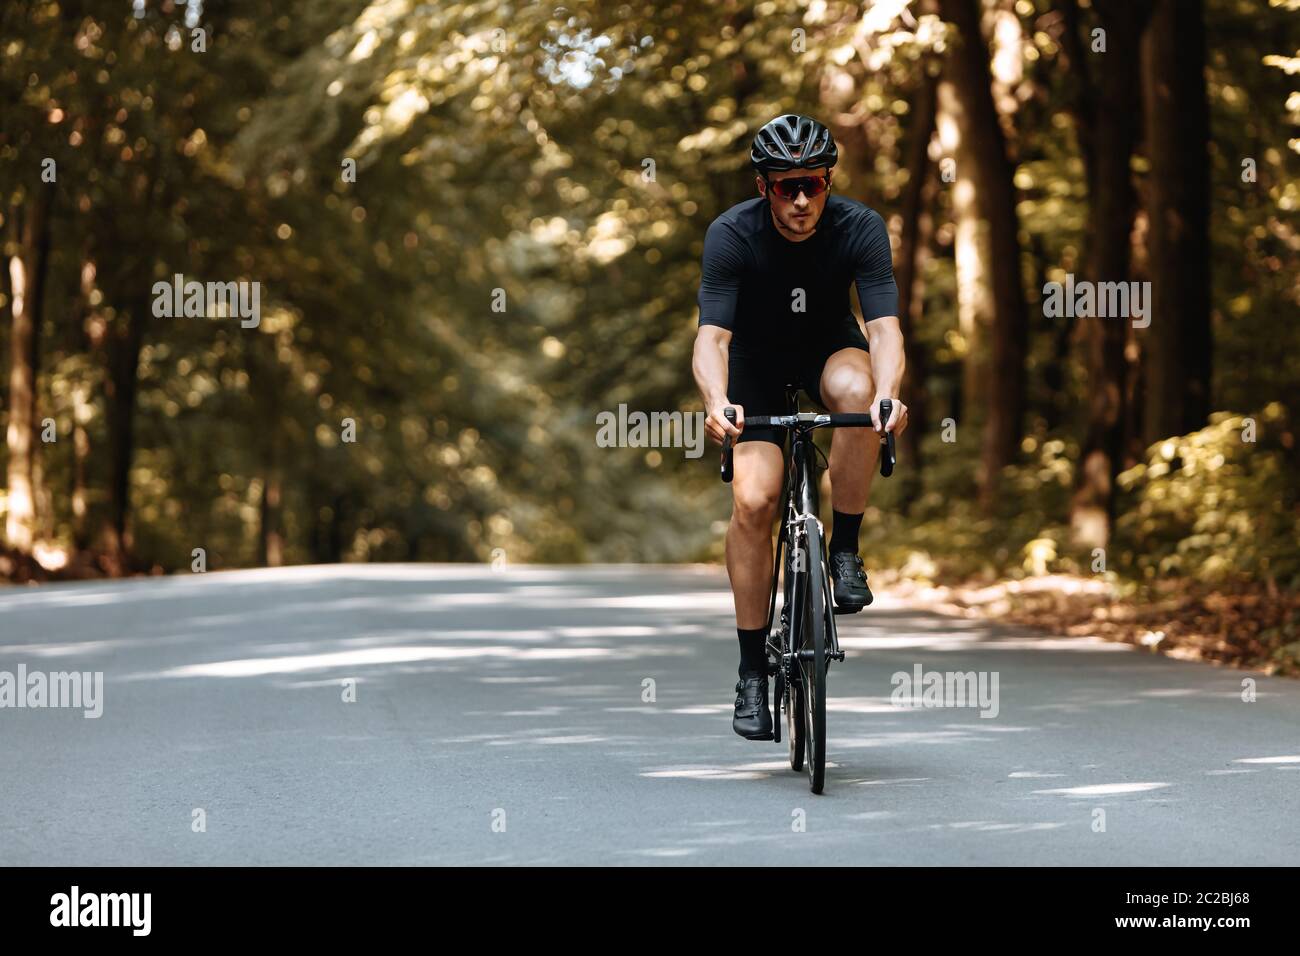 Mature bearded man in active wear and protective helmet dynamically riding bike on paved road. Bicyclist in mirrored eyeglasses enjoying favore hobby Stock Photo